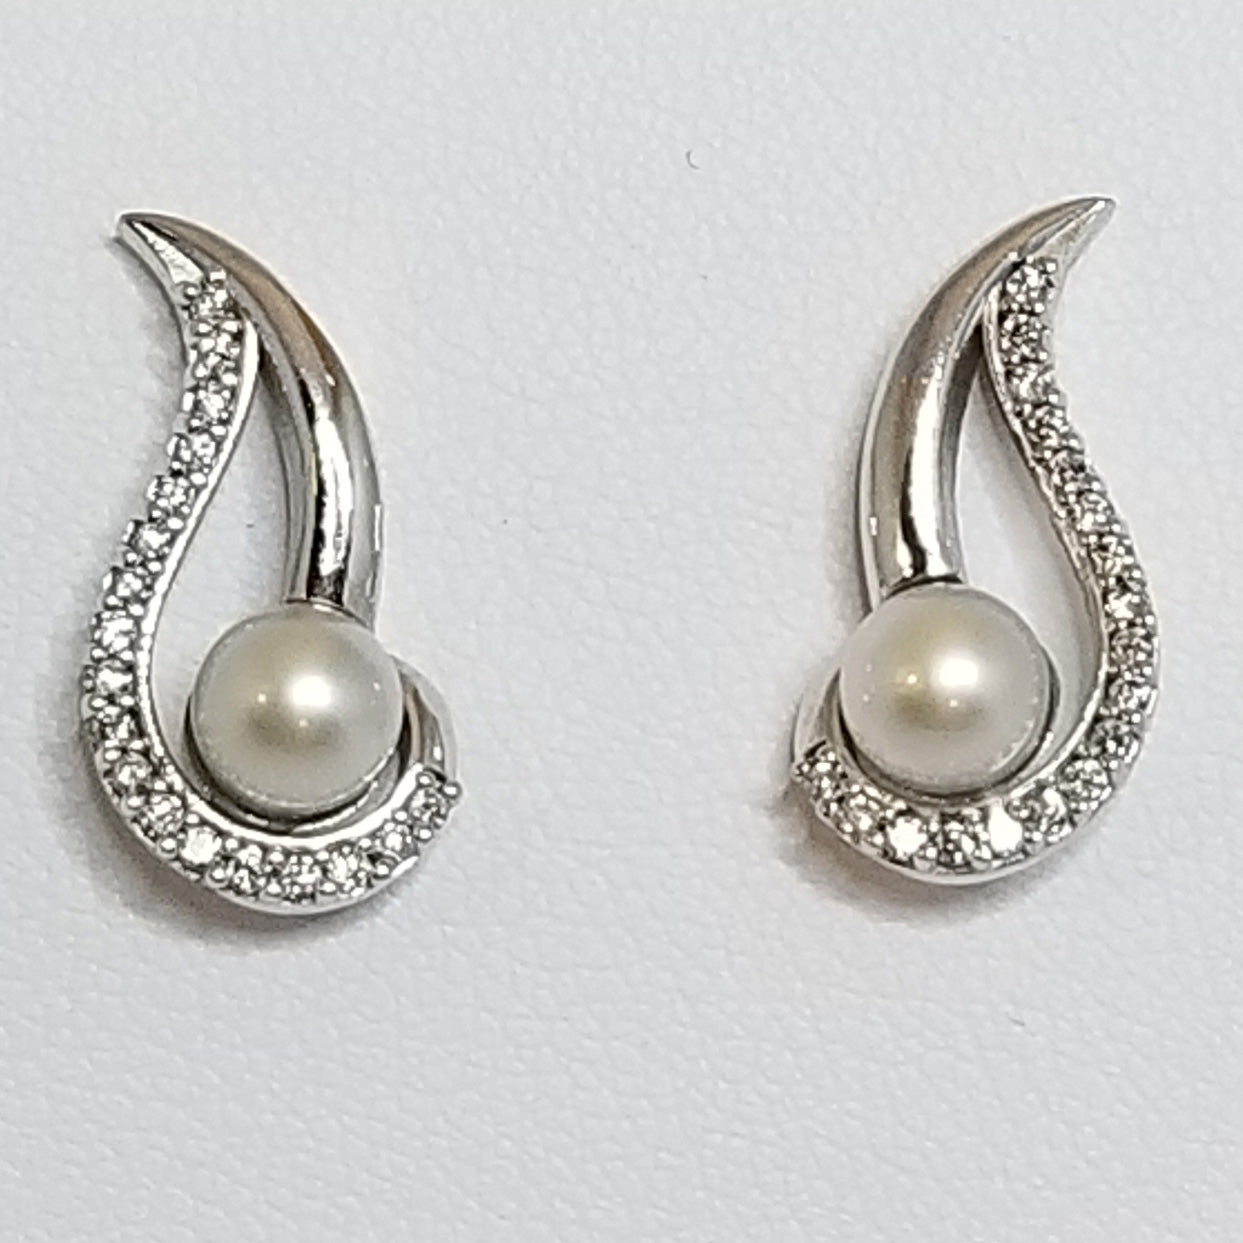 Ready to ship Pearl and diamond swirl earrings in 14k white gold